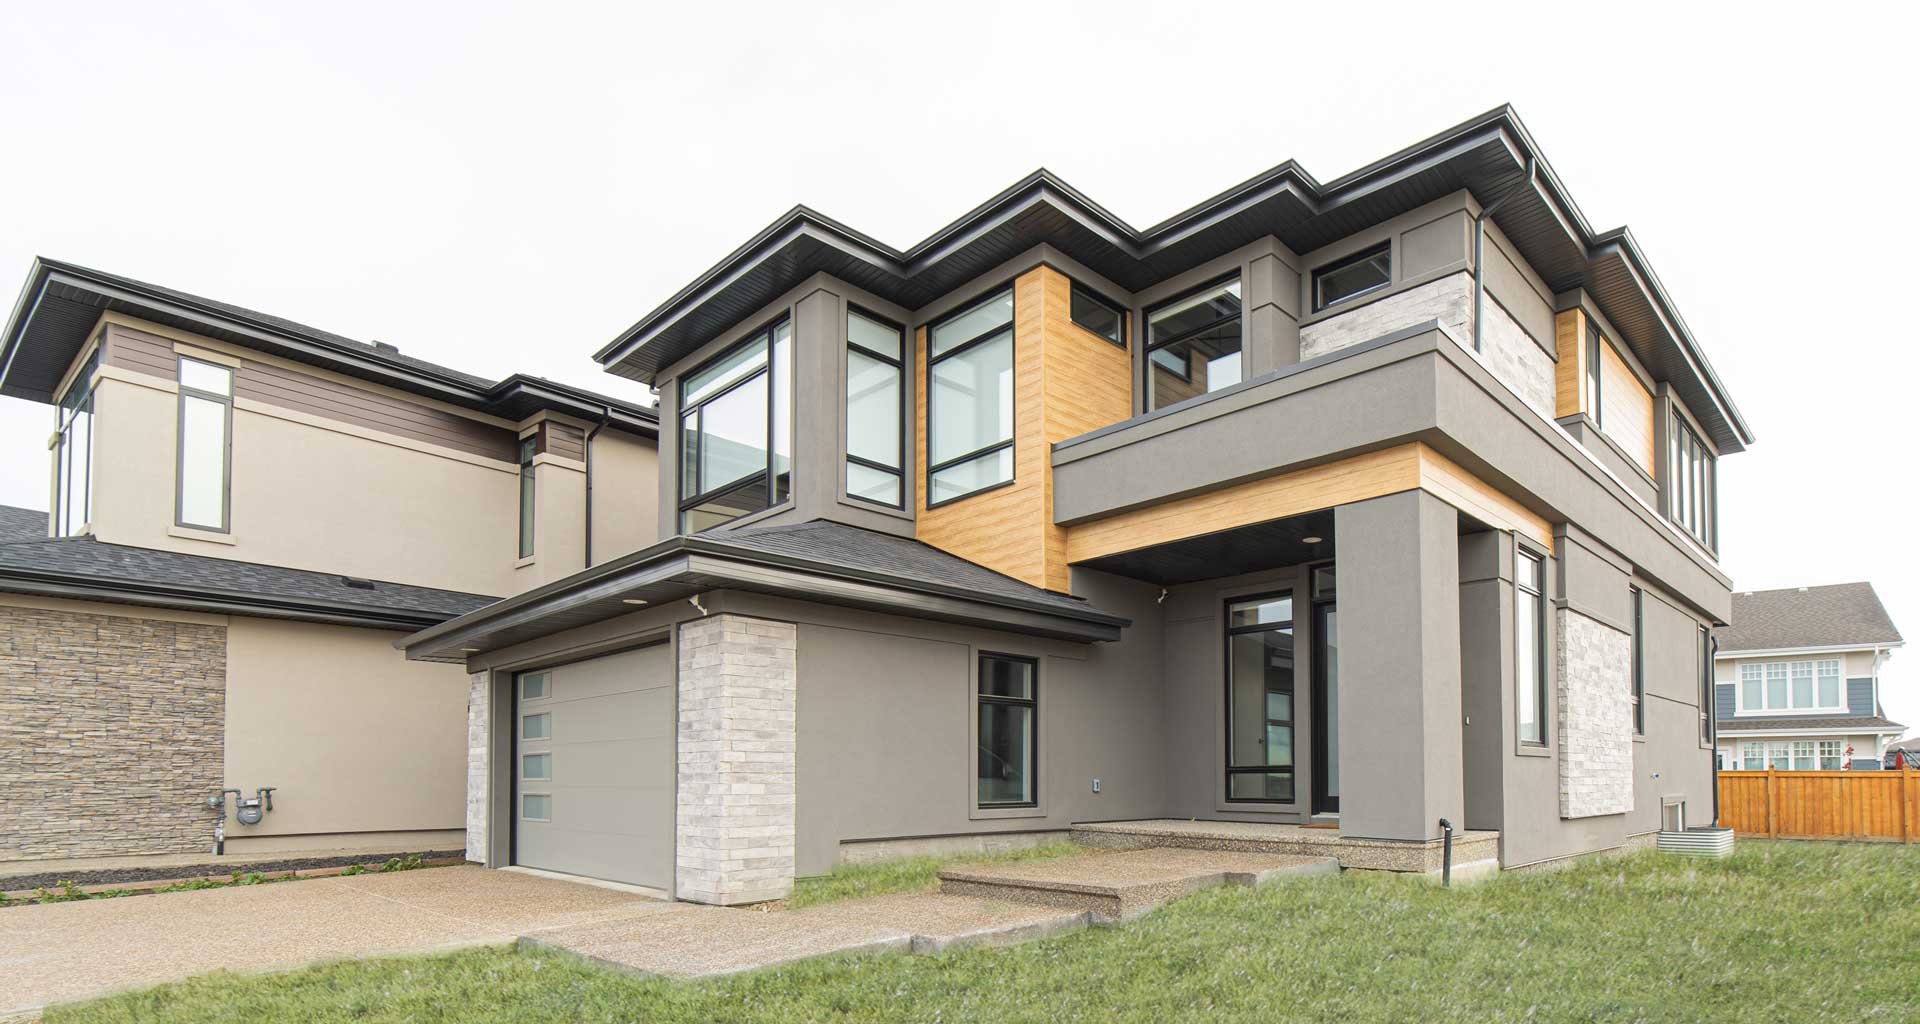 Home-builder-awards-builder-of-the-year-2020_Canadian_Home_Builders_Association_Award_Winners-Soho10